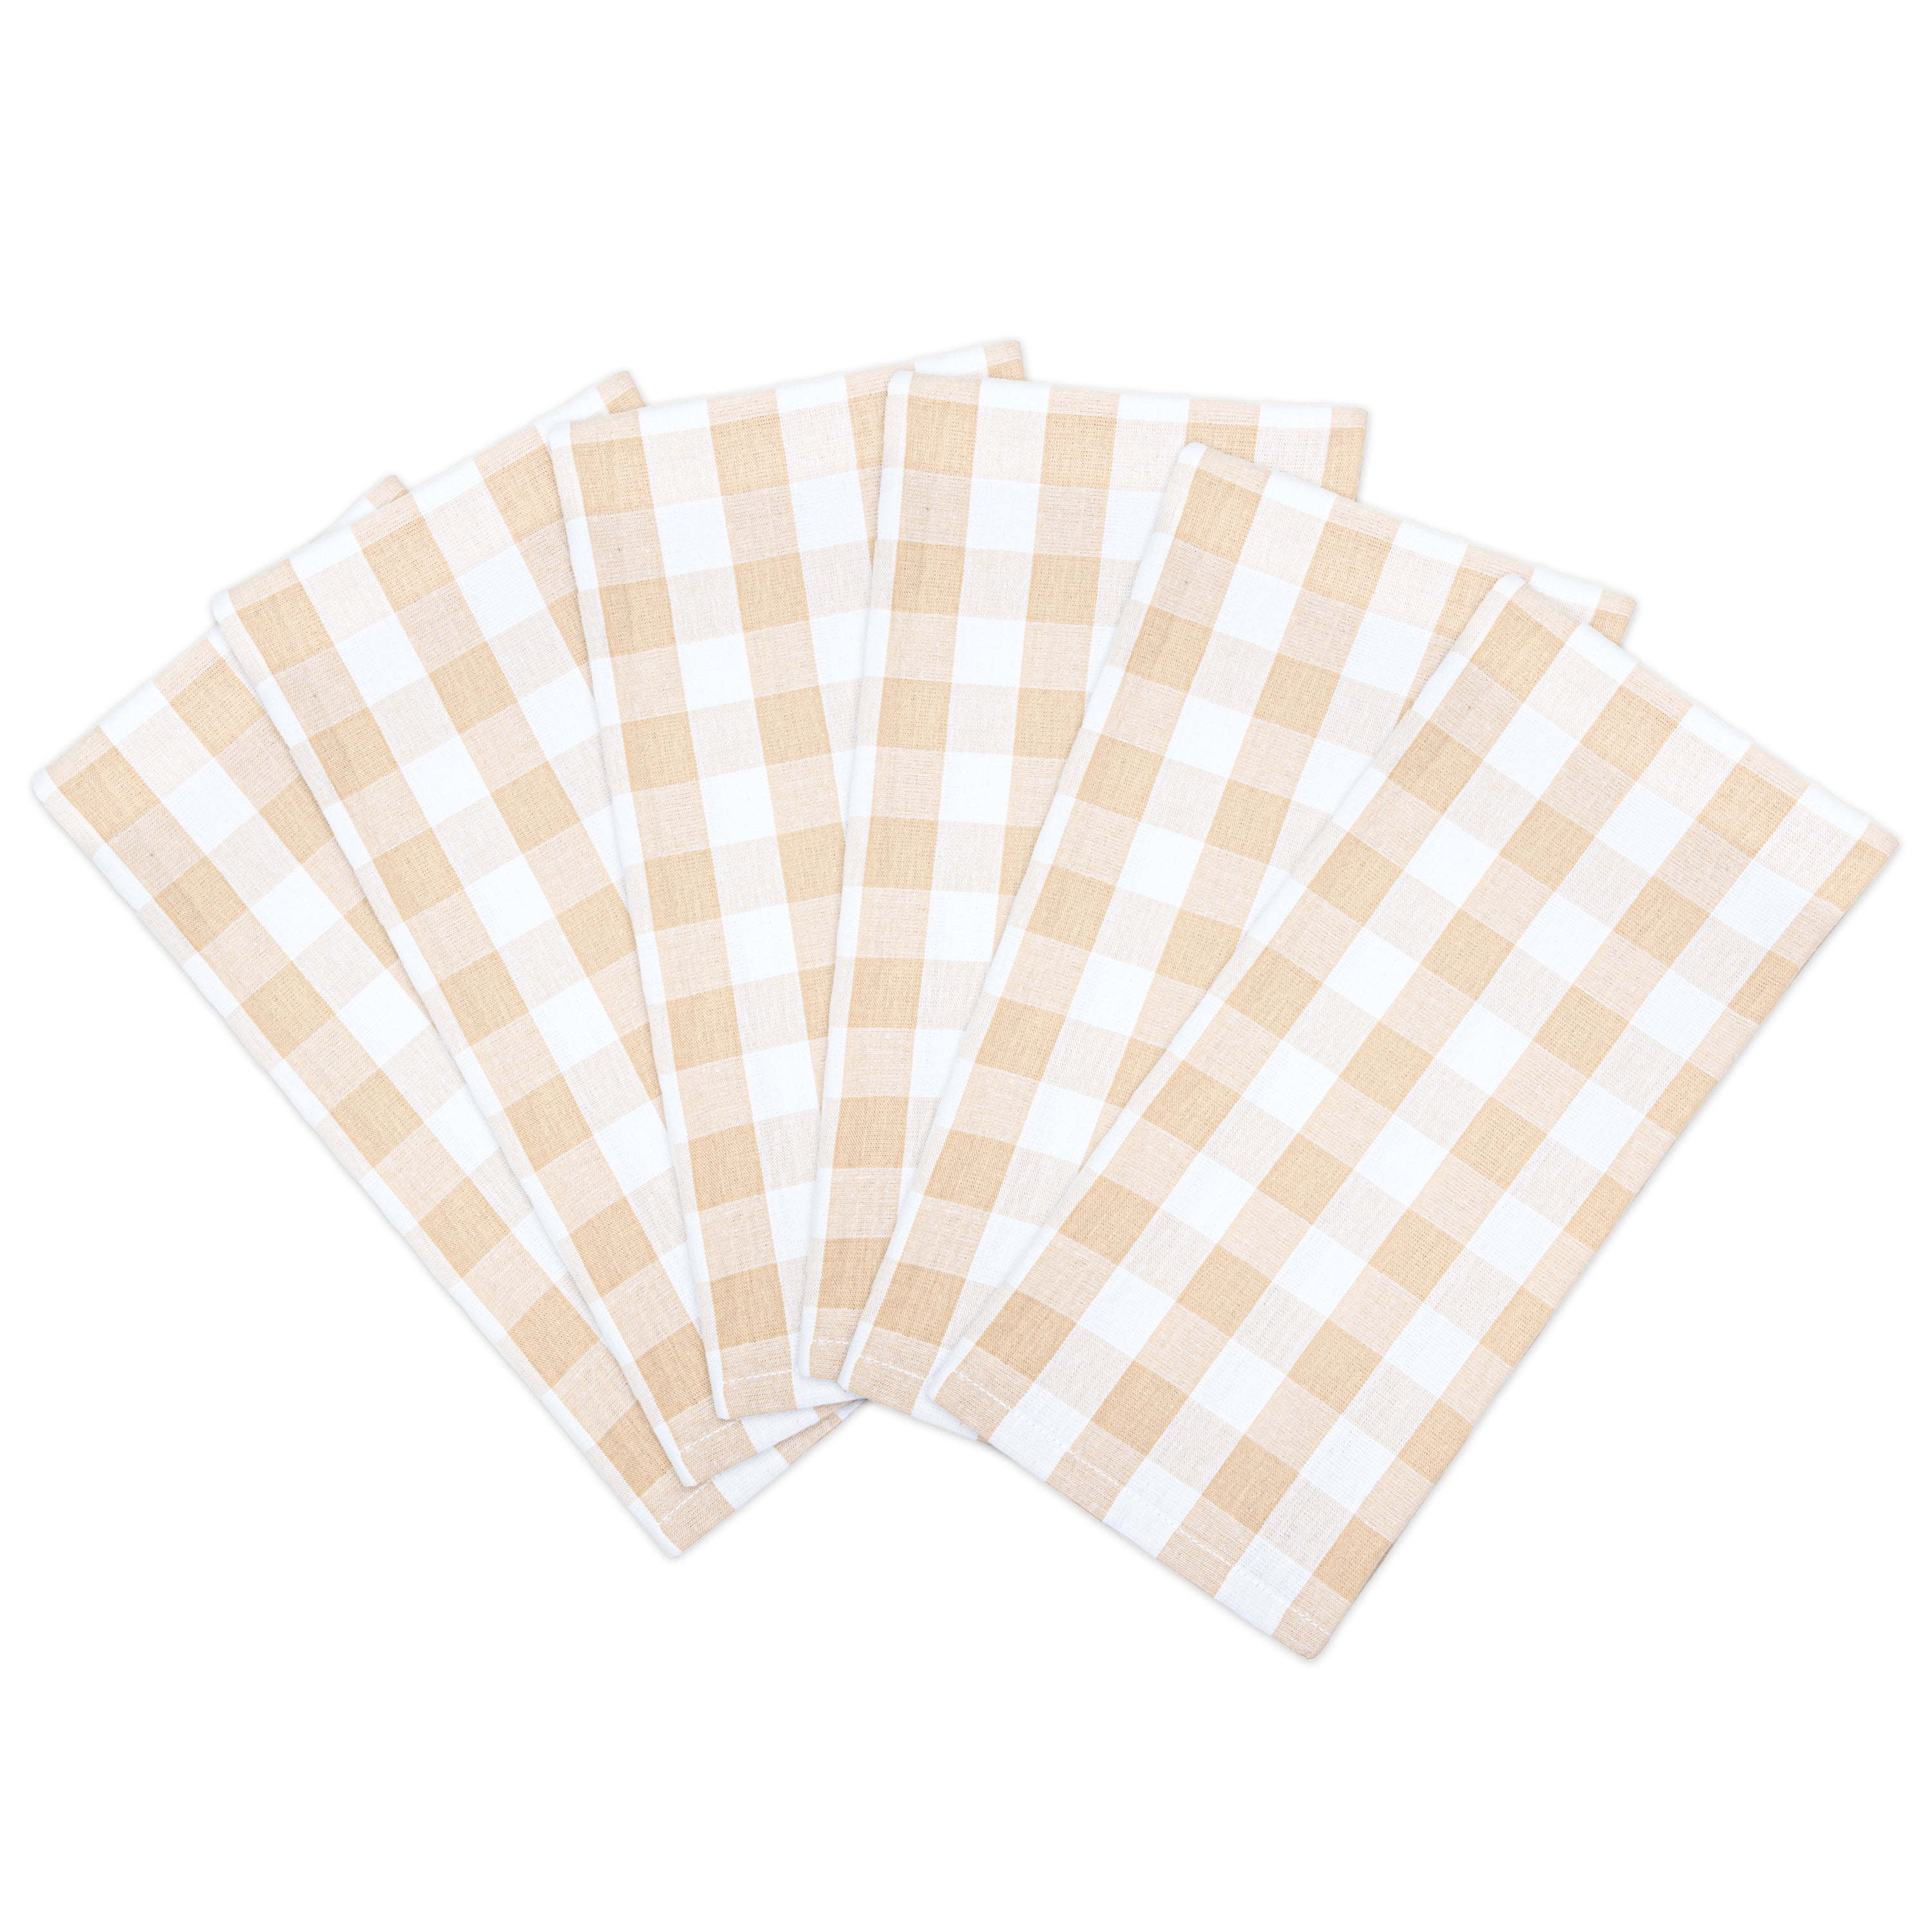 Arkwright 6 Pack of Buffalo Plaid Kitchen Towels - 20 x 30 - Beige & White  - Walmart.com